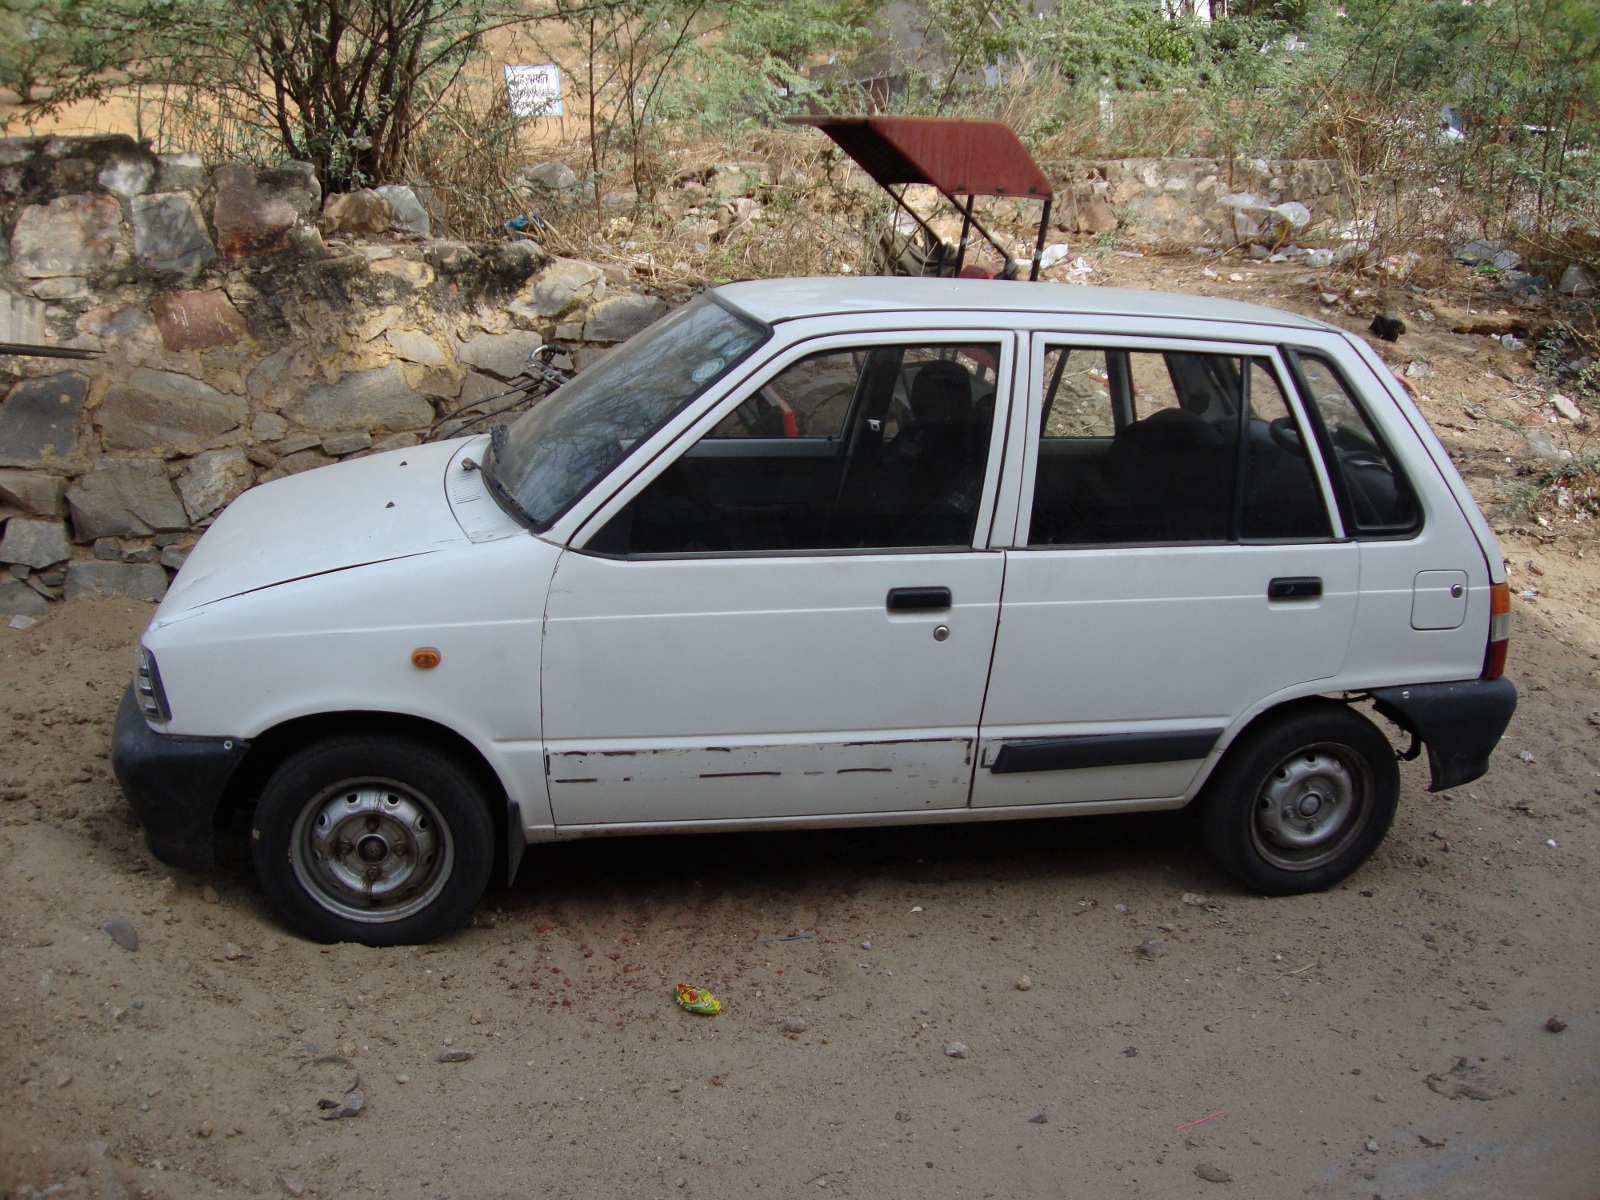 One of the many Maruti 800s based in Jaipur.